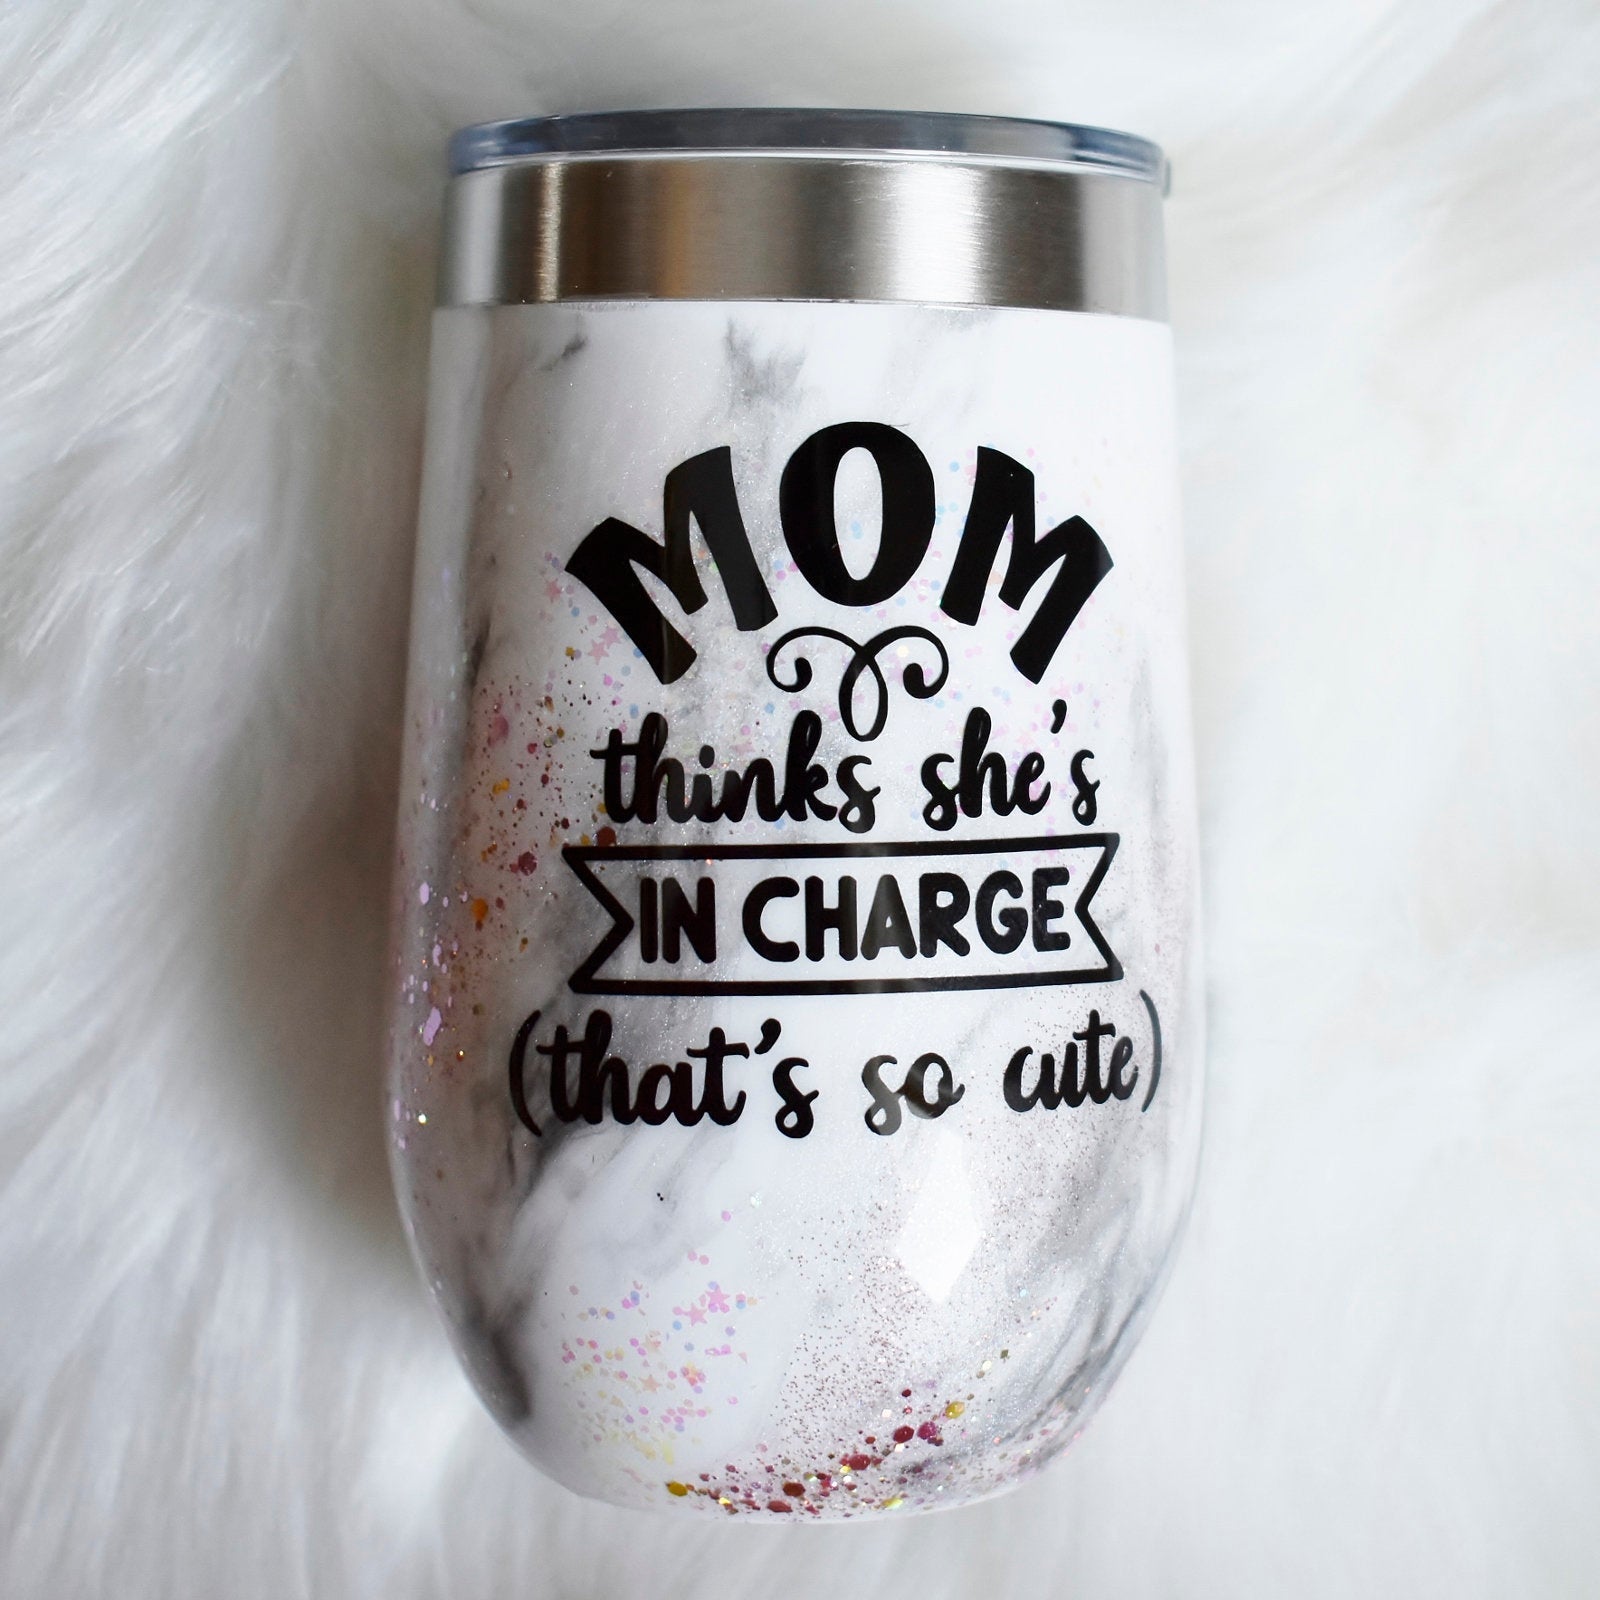 Mom Thinks She's in Charge RTS 16 oz stainless steel wine glass